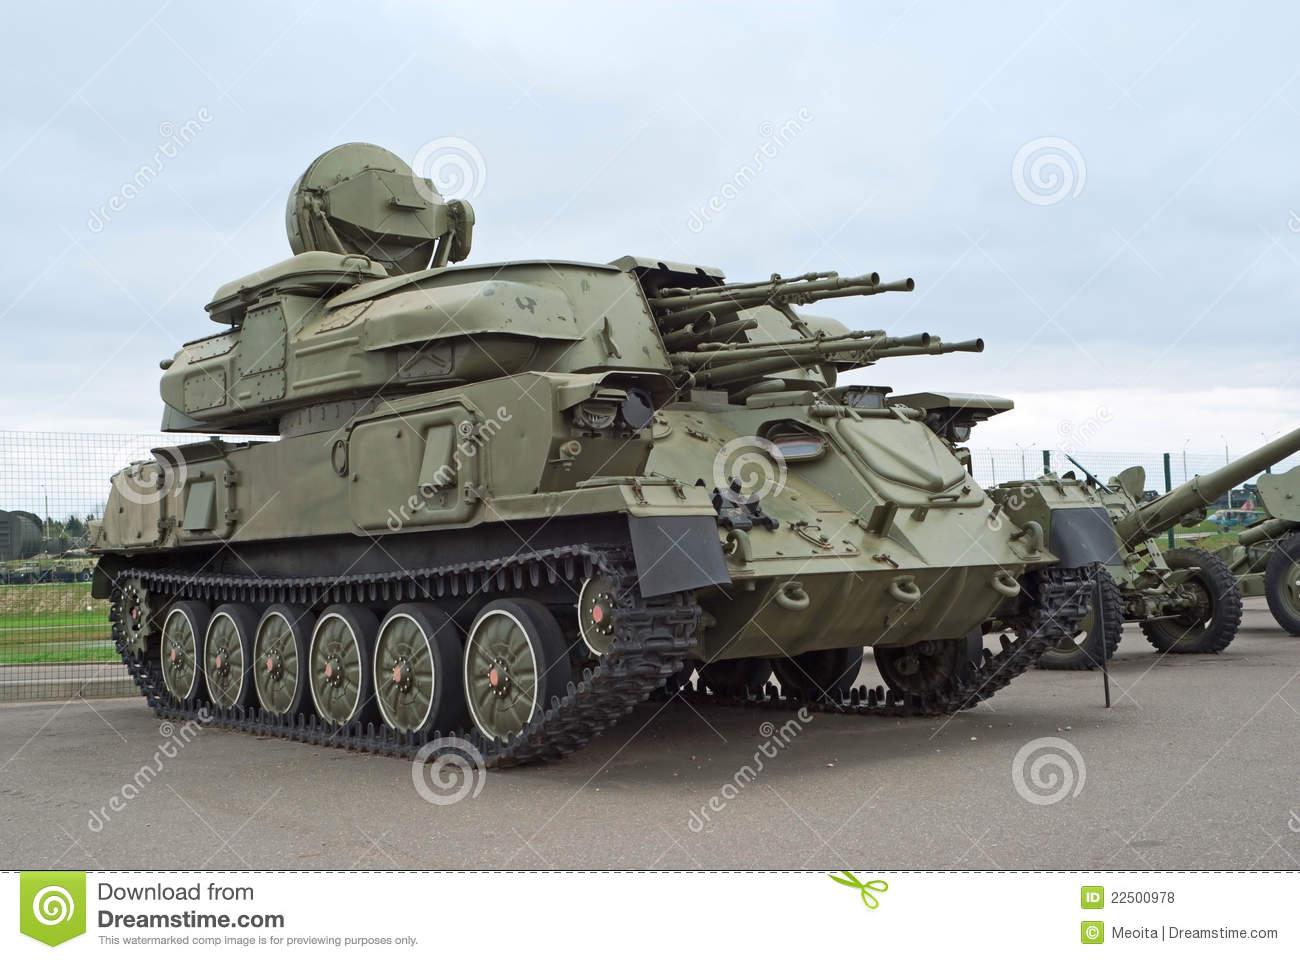 ZSU-23-4 Pics, Military Collection